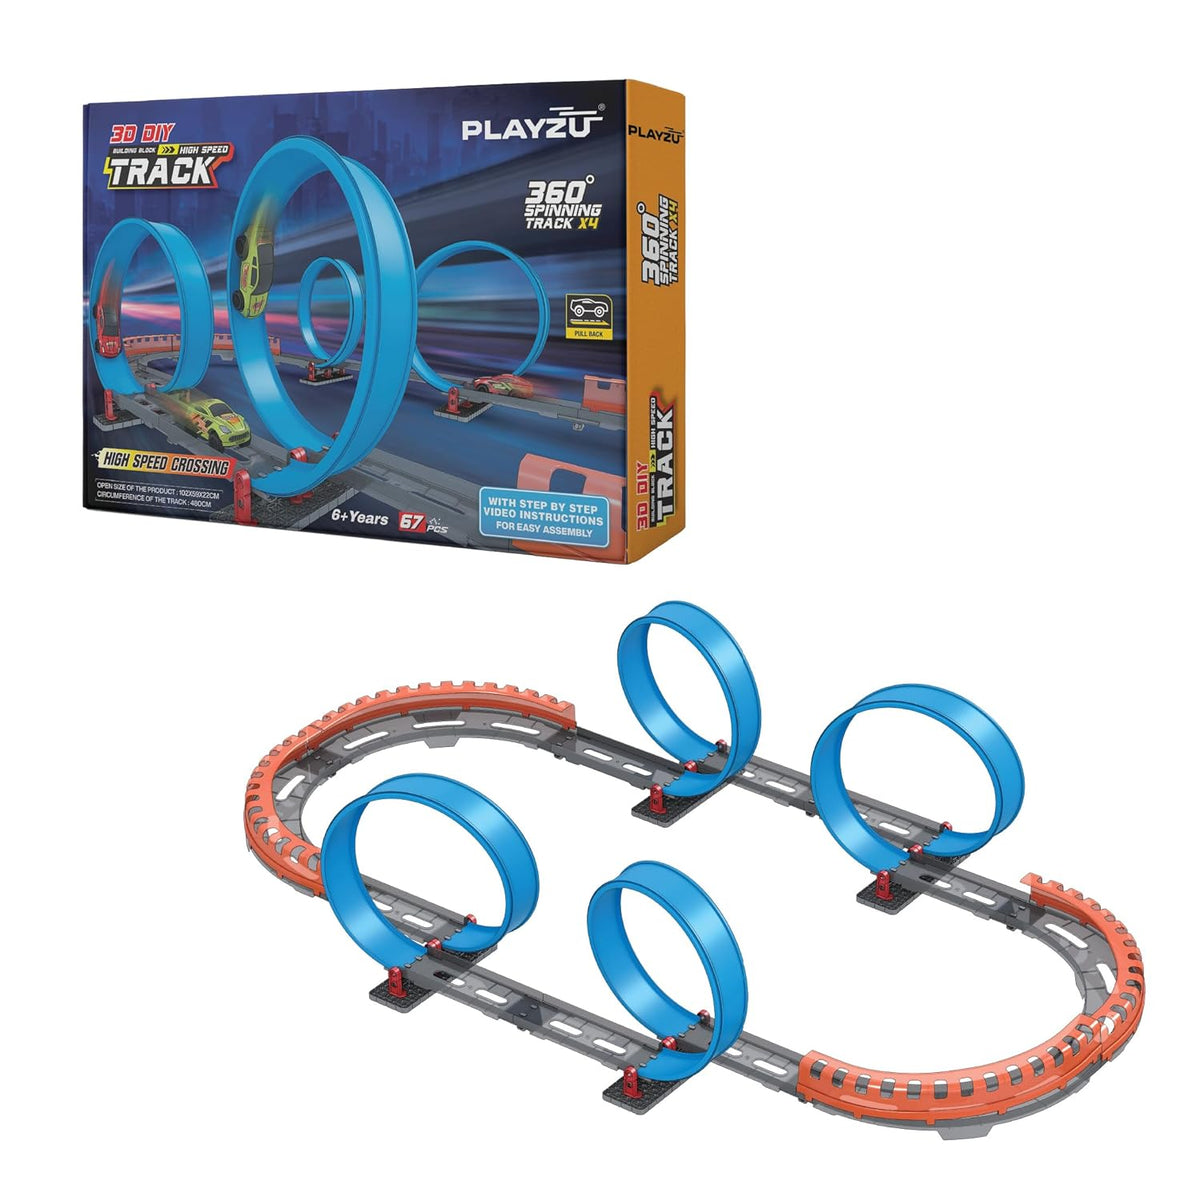 Playzu High Speed Pull Back -4A 66 pcs Four 360 Degree Loops Racing Track Game with Building Block Sets and Two Strong 1:64 Scaled Pull Back Cars for Ages 6+